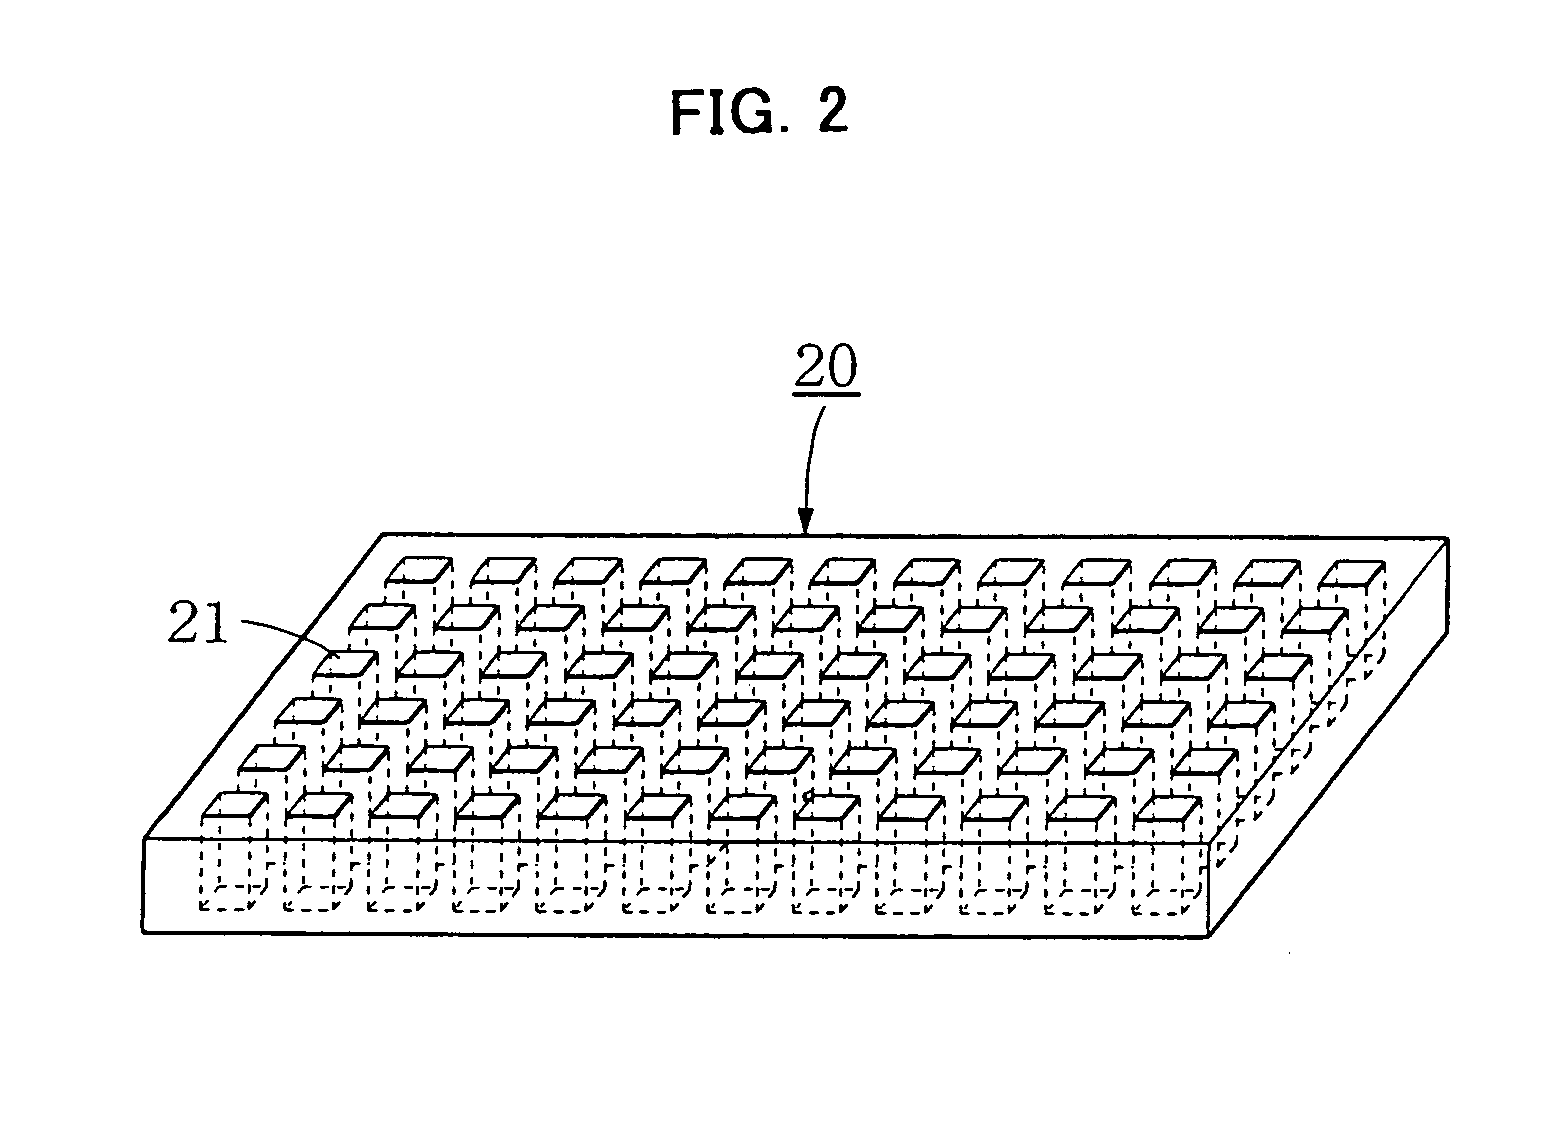 Array for crystallizing protein, device for crystallizing protein and method of screening protein crystallization using the same